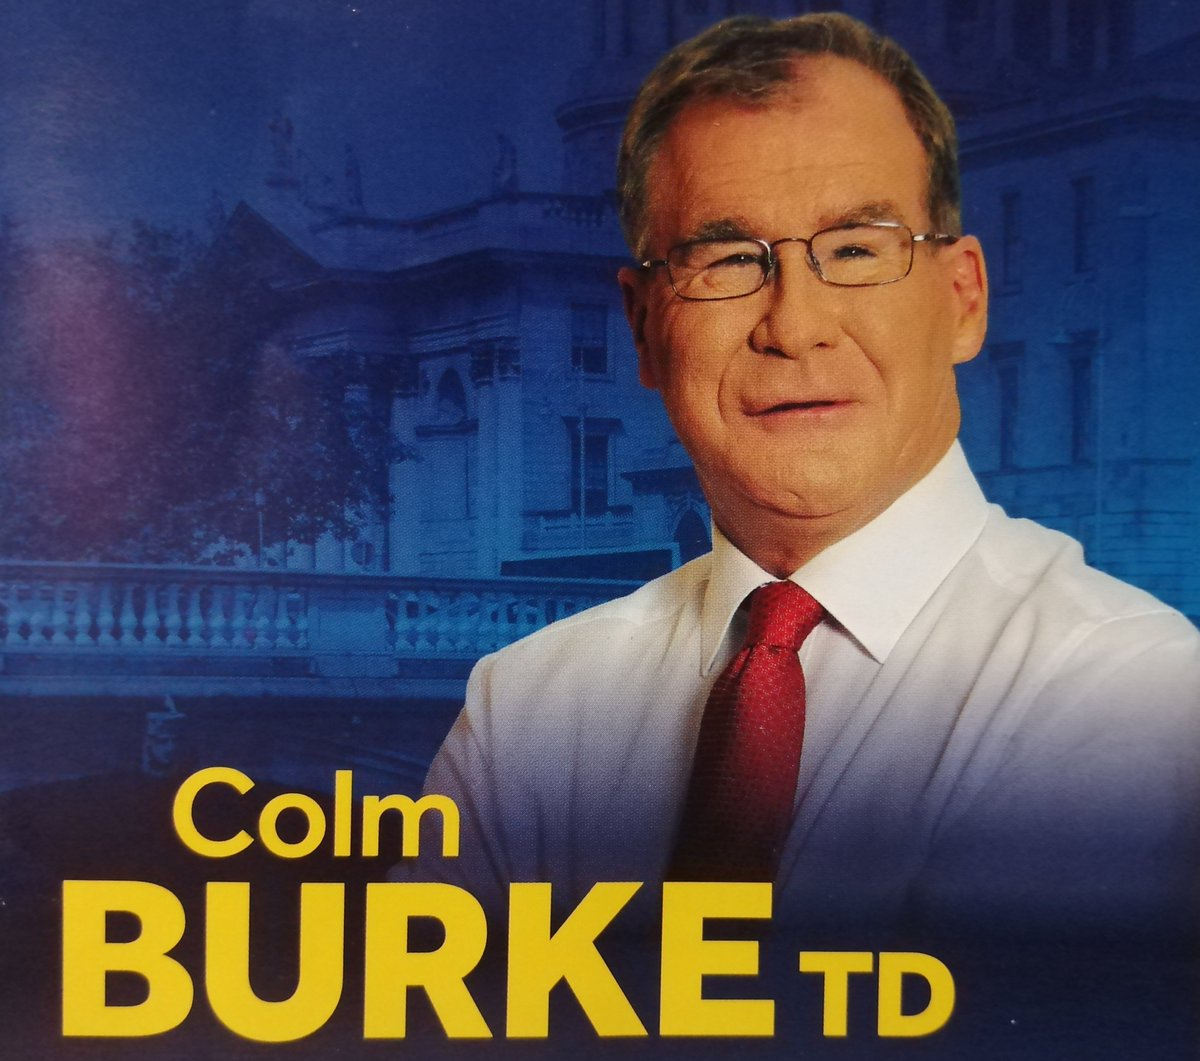 Tomorrow on 'The Zone', host Donal Quinlan will interview Colm Burke TD between 11-12pm. 

100.5FM, Cork City Community Radio on the TuneIn app, or ask your smart speaker for the same. Otherwise, you can stream us from our website, at cr.ie. #corkcity #corklike